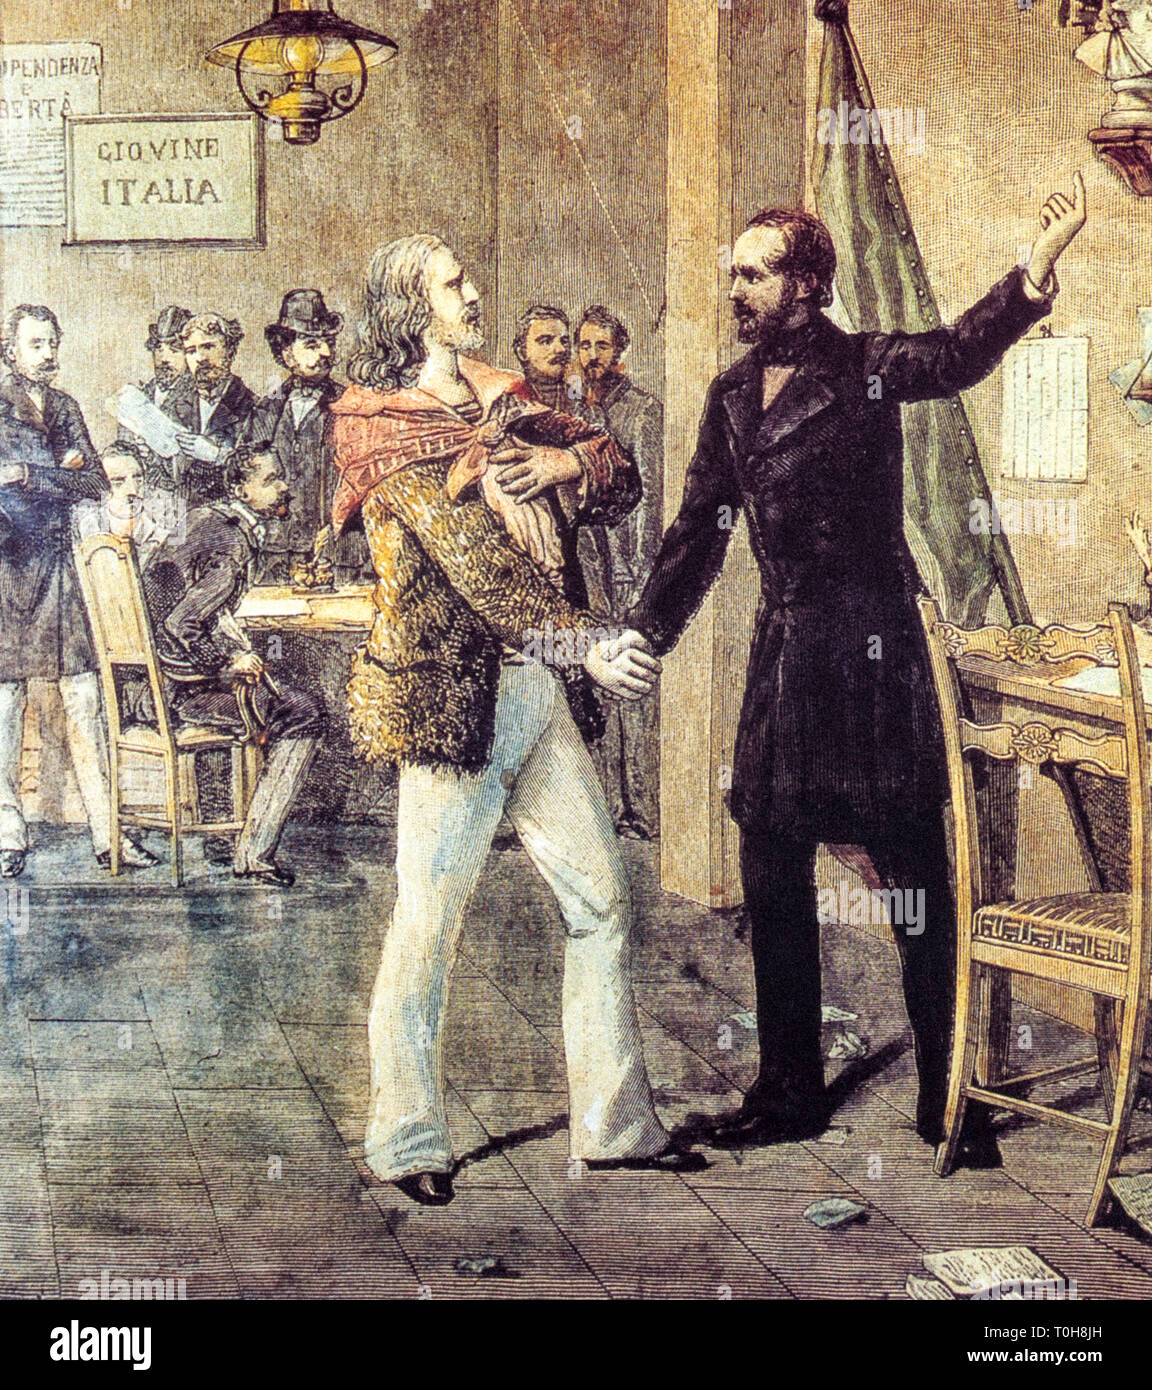 Giuseppe Mazzini and a Garibaldi young Meet to Marseilles in 1833. Garibaldi is sailor and Mazzini to convince him persuaded not to join the Sardinian military navy in order to carry out works of Conspiracy Stock Photo